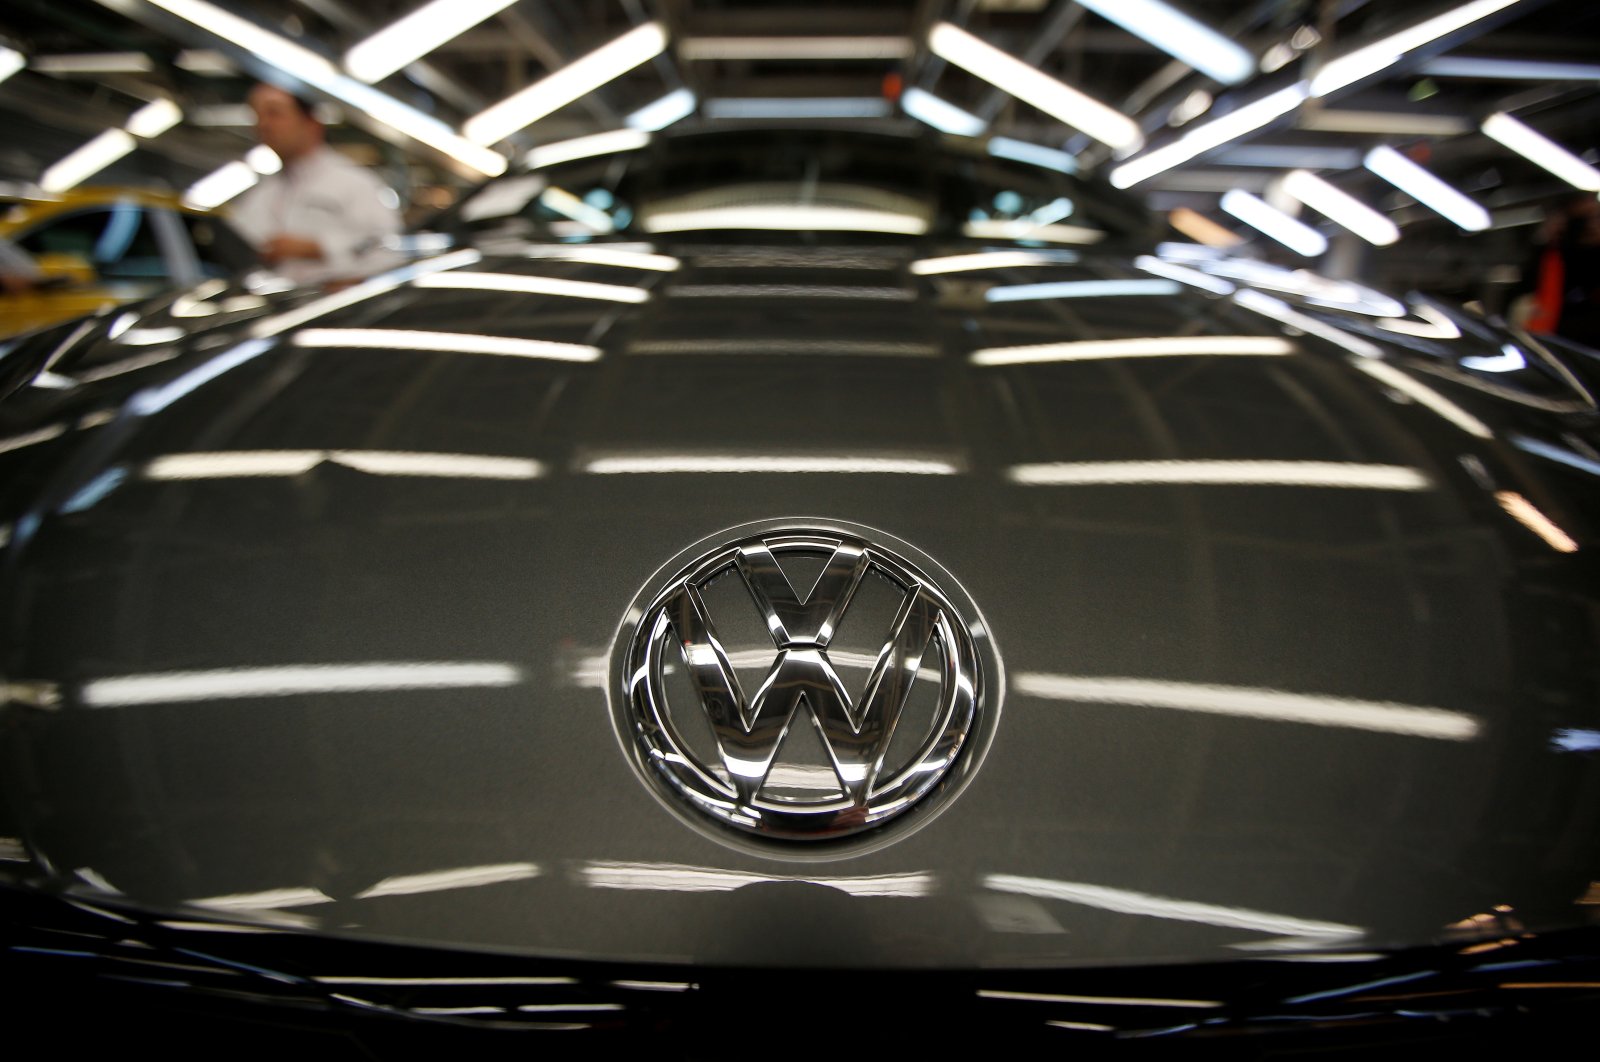 Volkswagen's logo is seen on a car on an assembly line at the carmaker's factory in Palmela, Portugal, Dec. 9, 2016. (Reuters Photo)